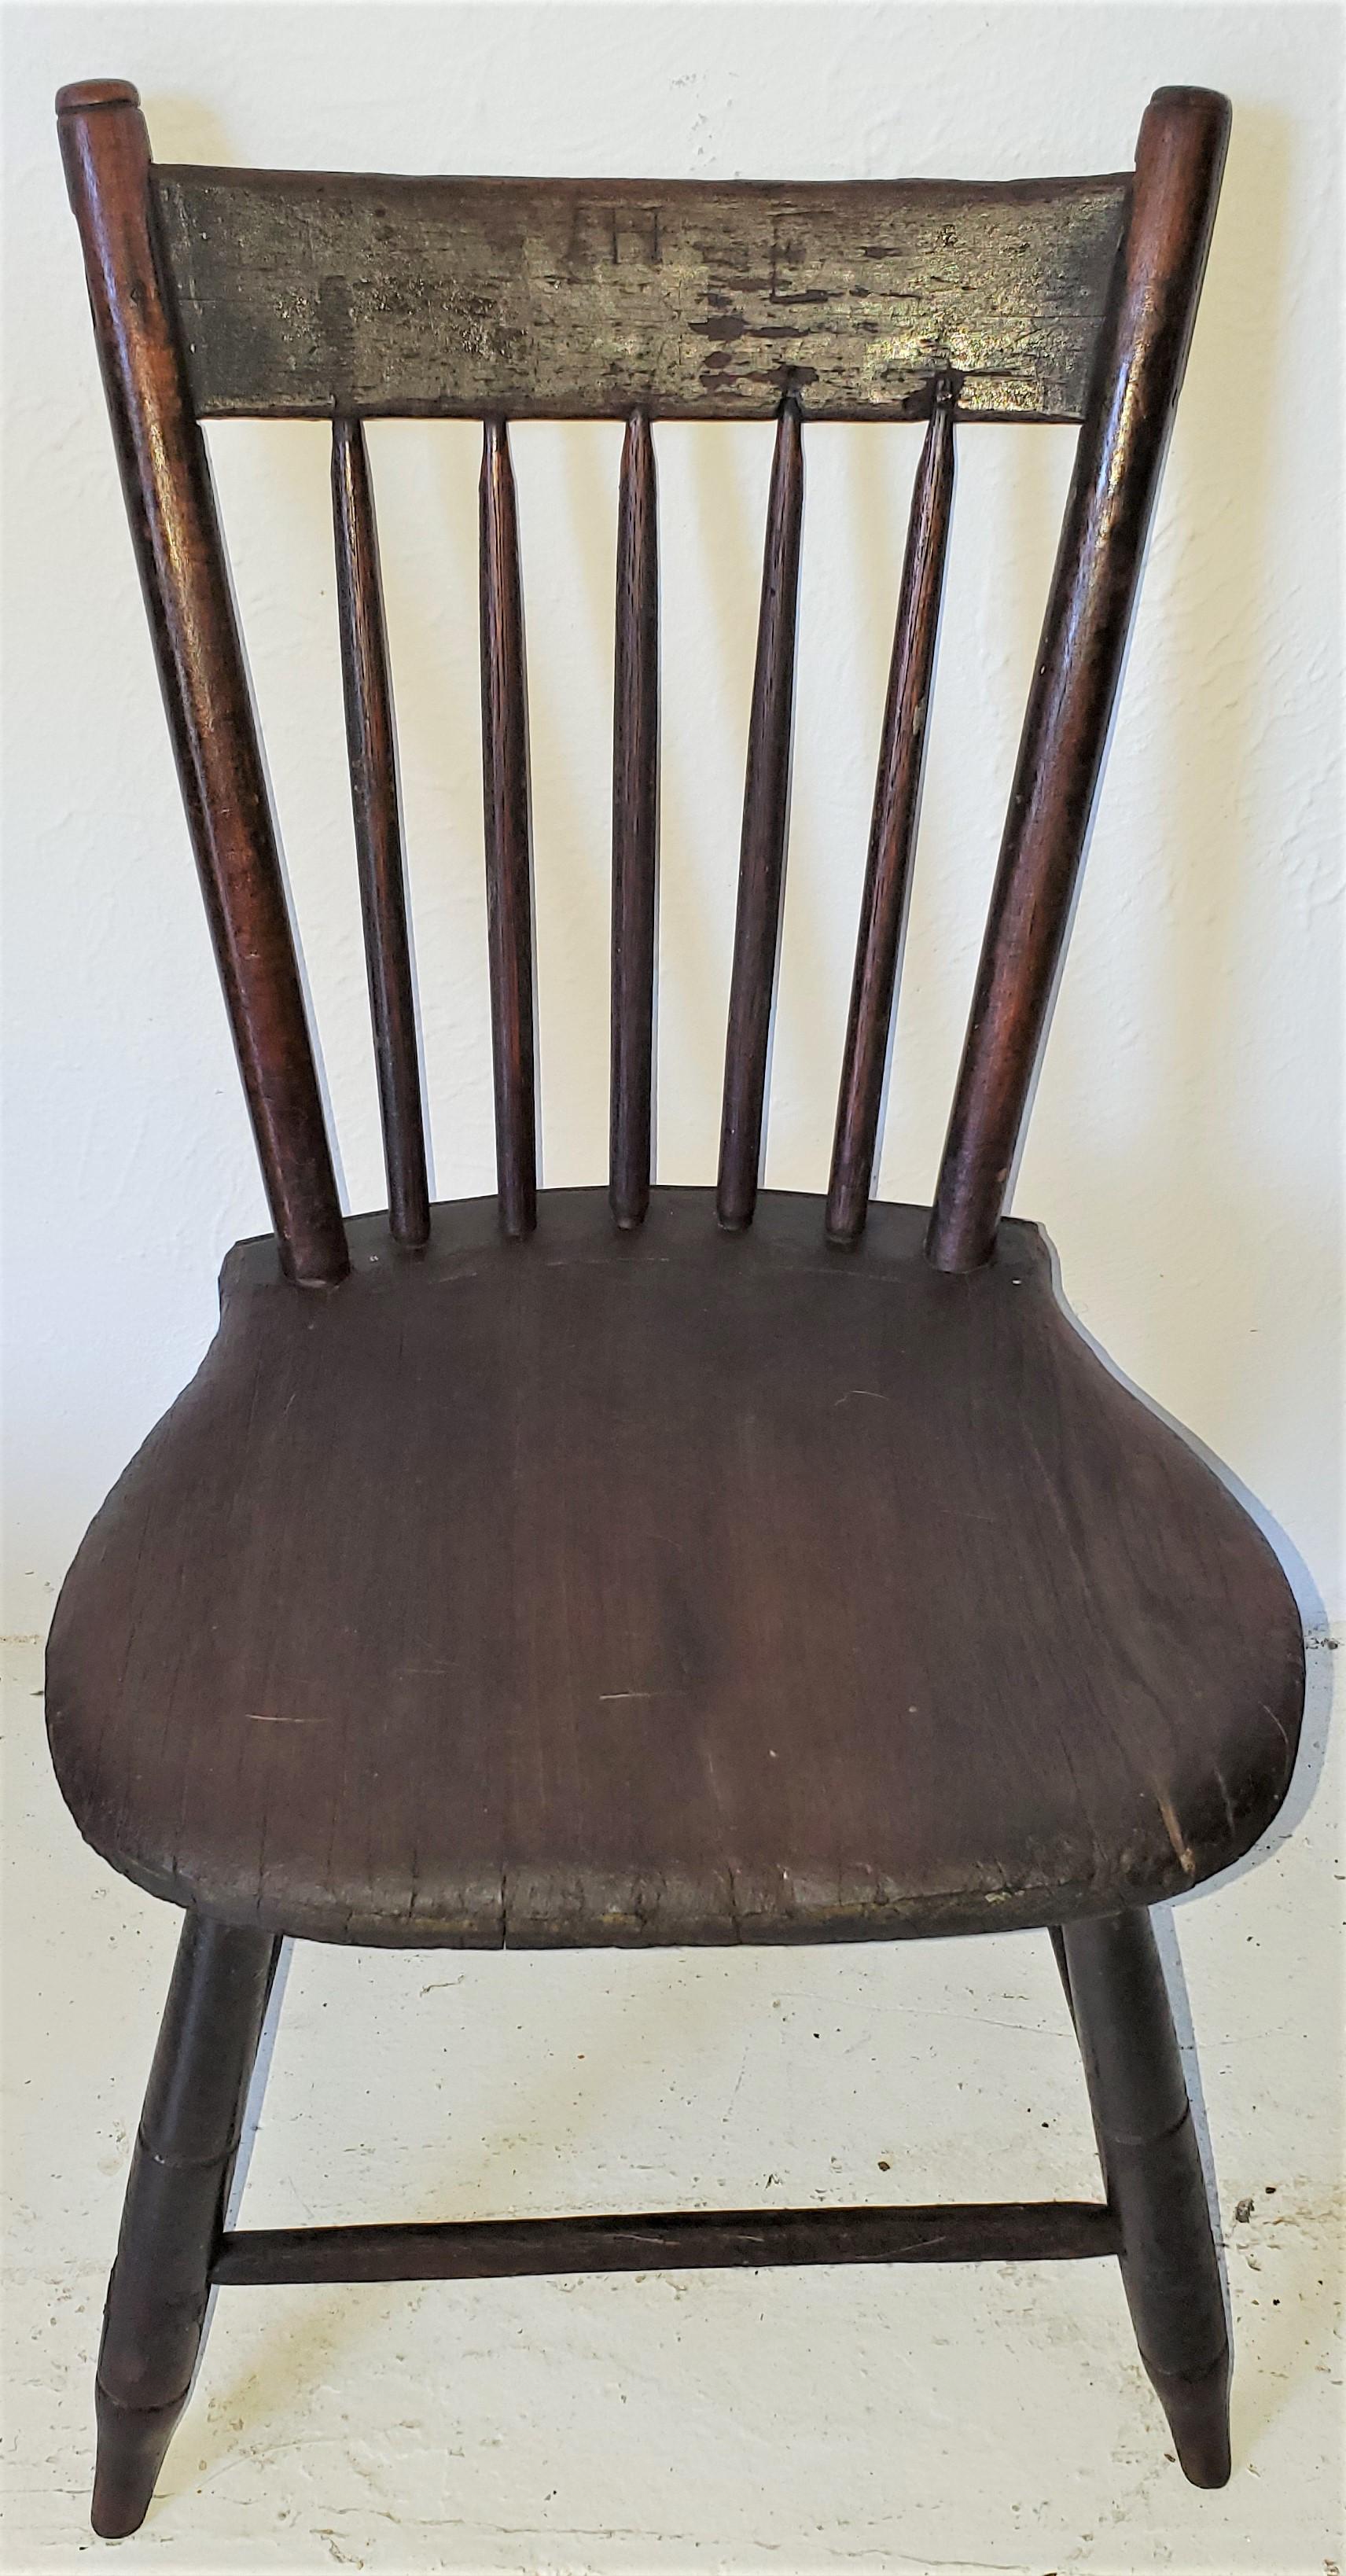 Presenting an absolutely stunning and historic 19th century American walnut childs chair belonging to Lida Calvert Hall 1867.

This Chair has impeccable provenance:

It is part of the Lida Calvert Hall Obenchain Collection and has been in the